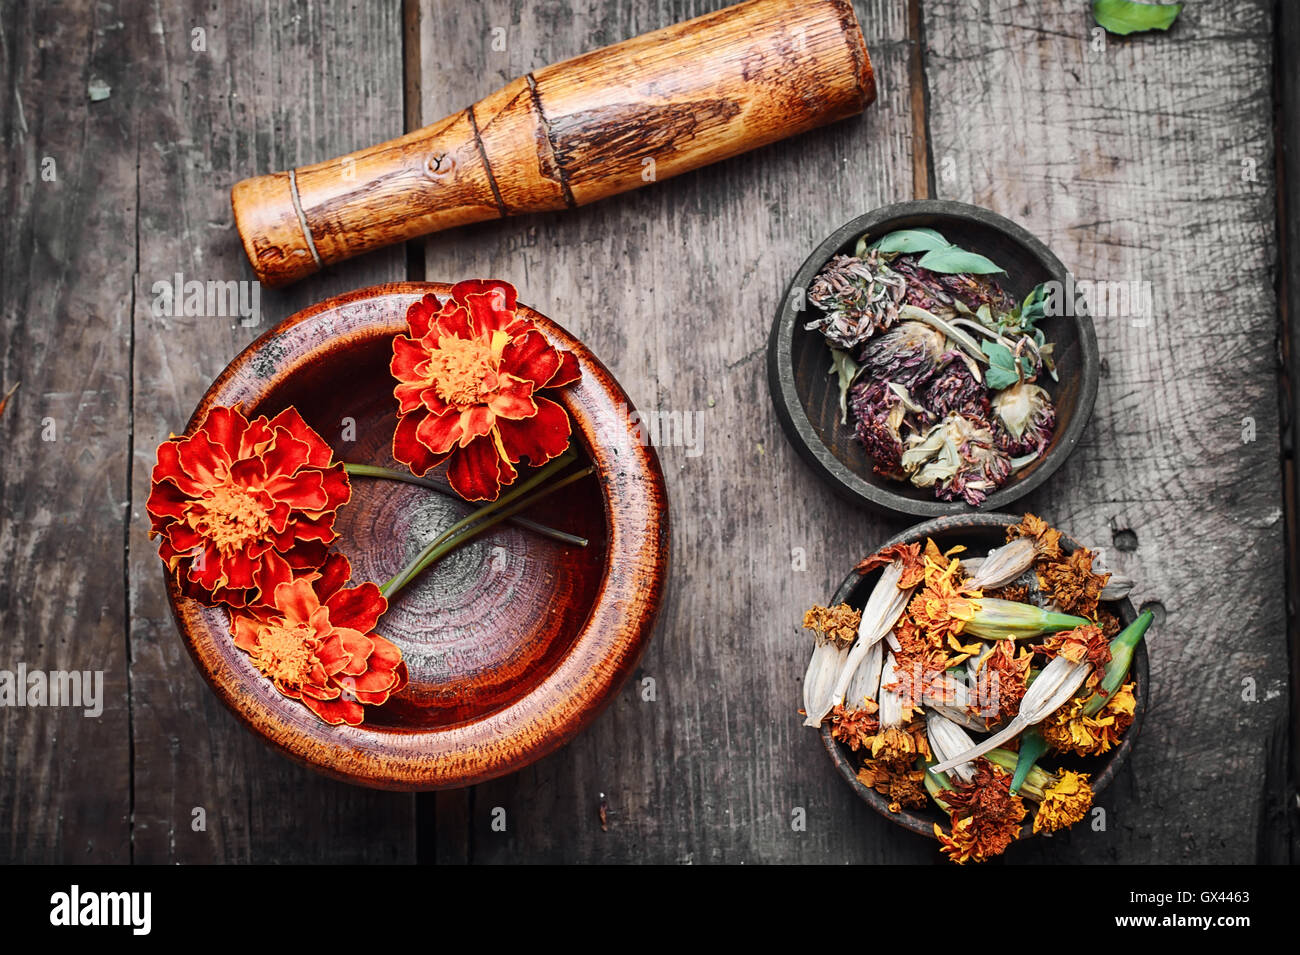 Mortar with healing flowers, plant marigolds and pestle Stock Photo - Alamy